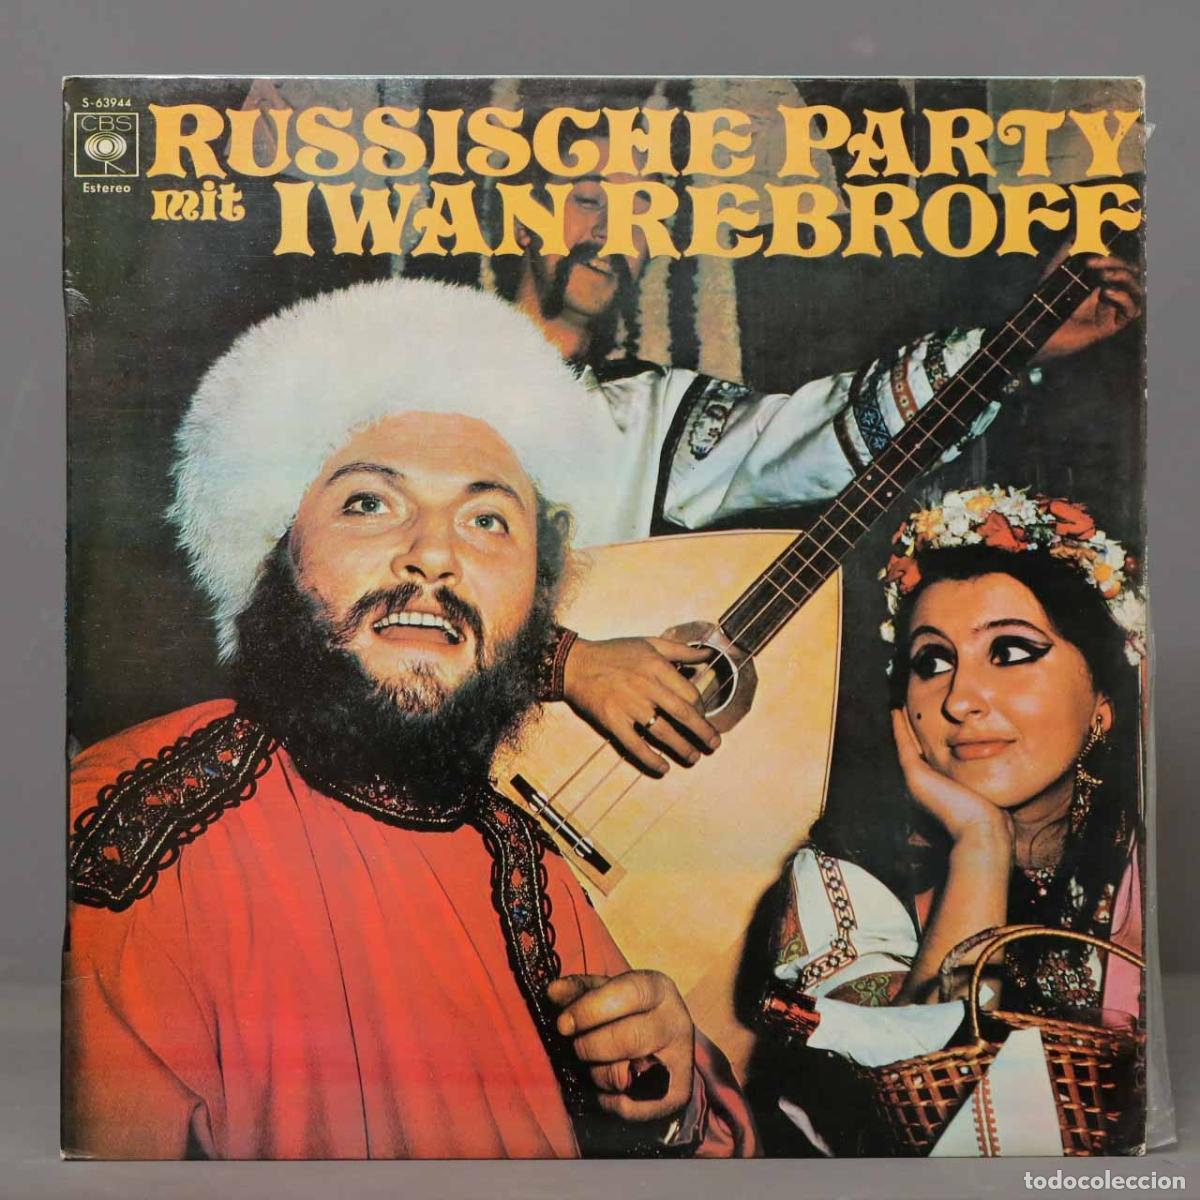 lp. iwan rebroff – russische party mit iwan reb - Buy LP vinyl records of  Ethnic and World Music on todocoleccion